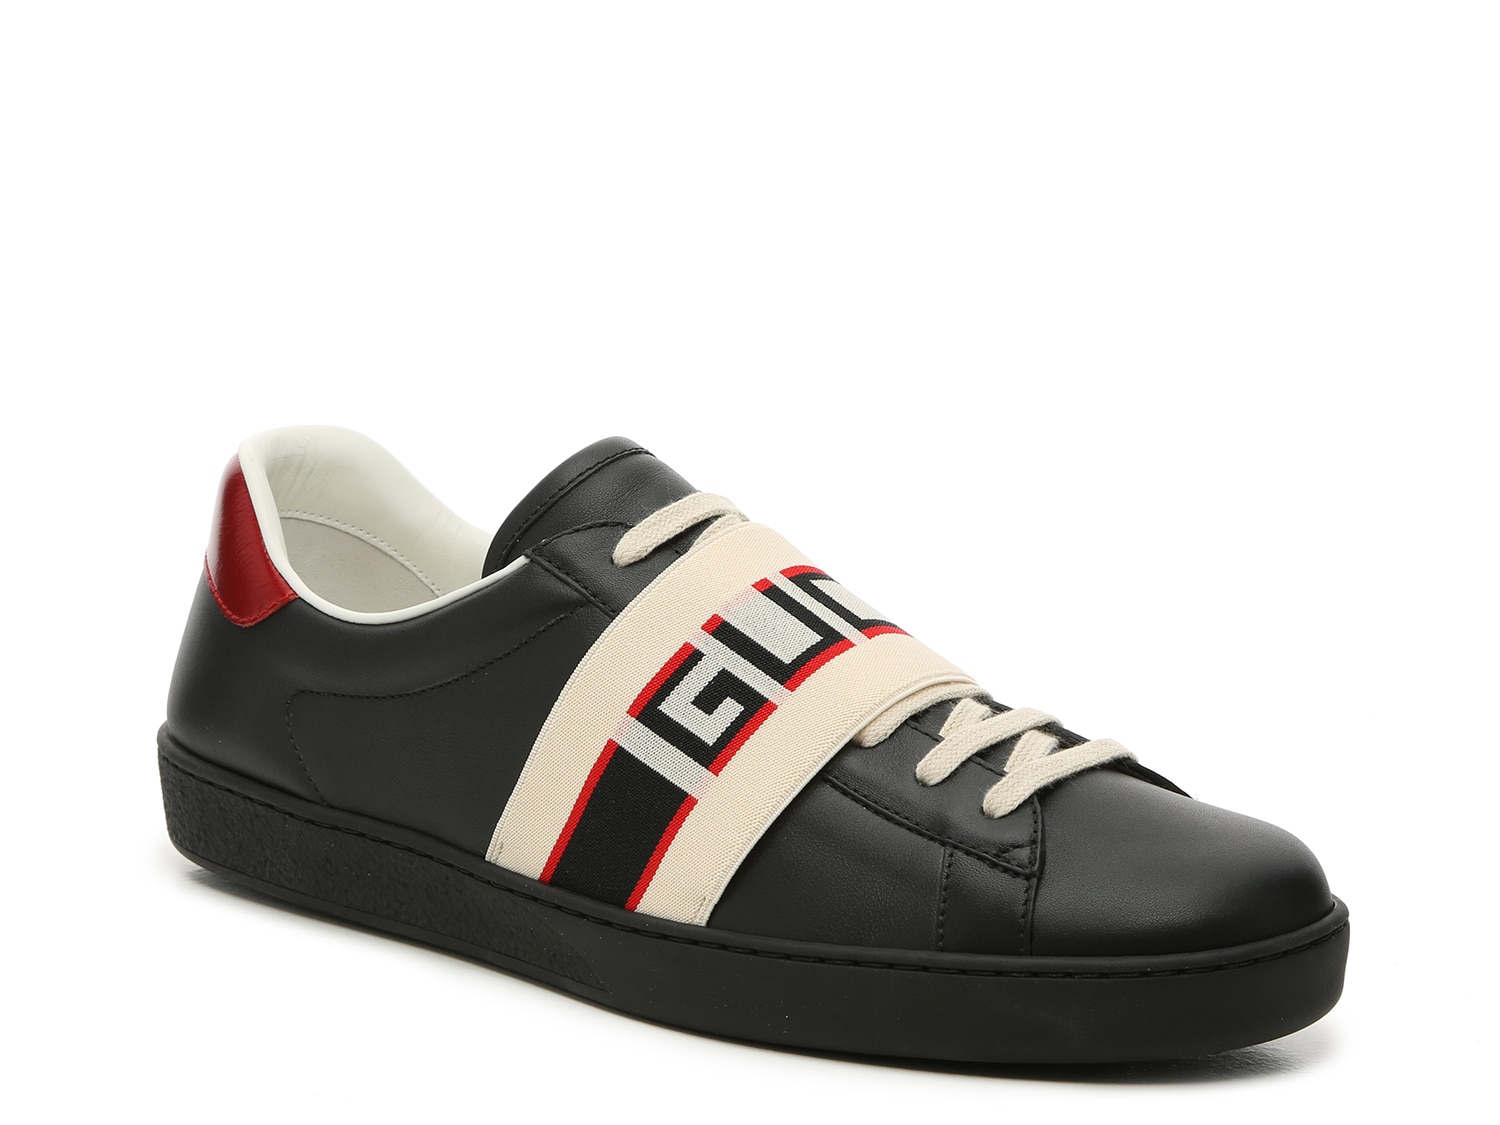 Gucci Shoes | Gucci Sneakers, Loafers 